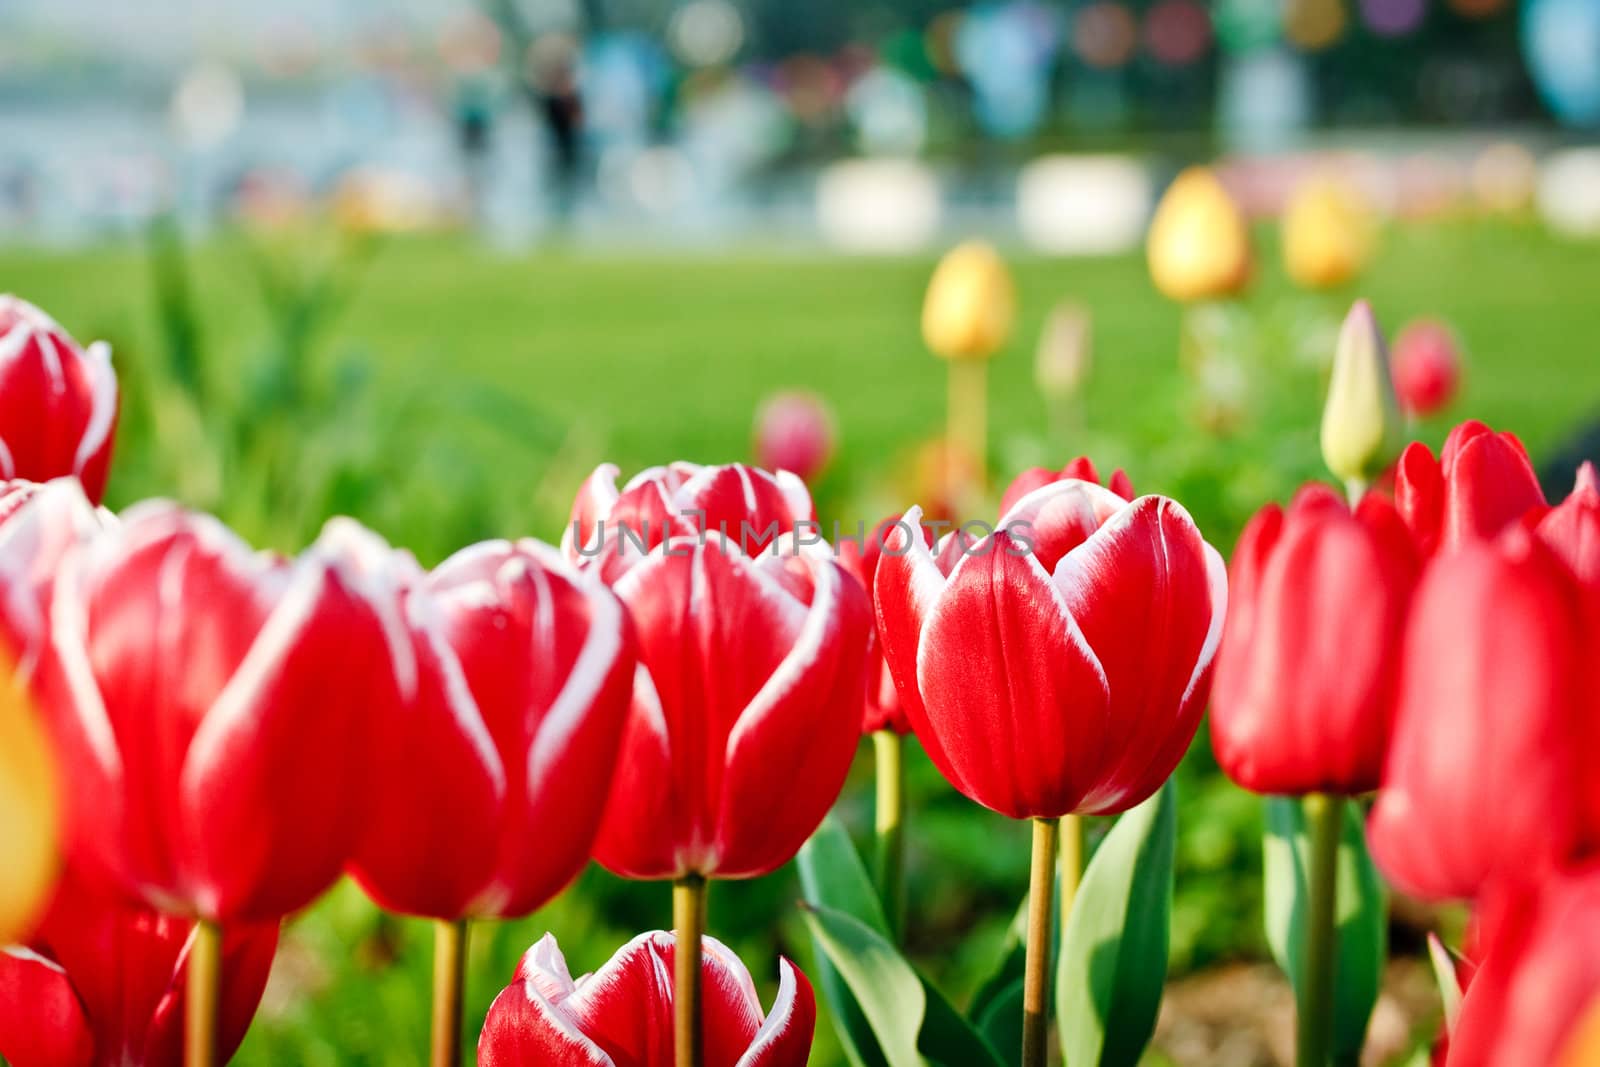 Blooming red tulips with selected focus on blurry background